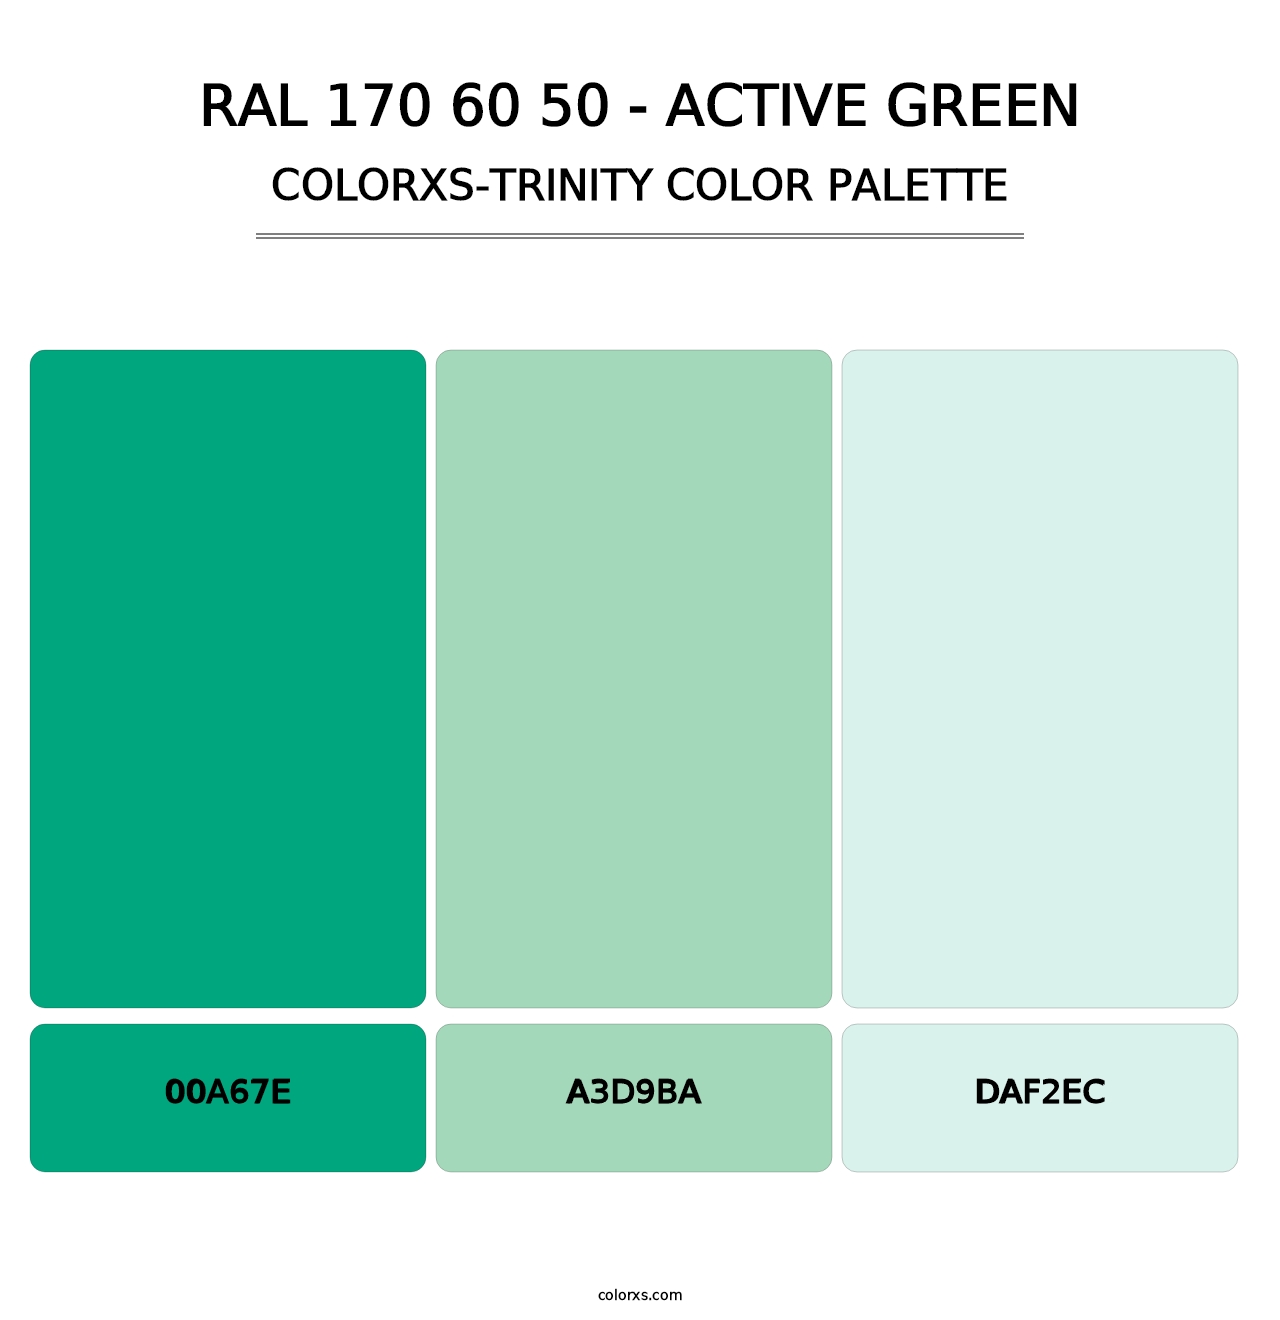 RAL 170 60 50 - Active Green - Colorxs Trinity Palette